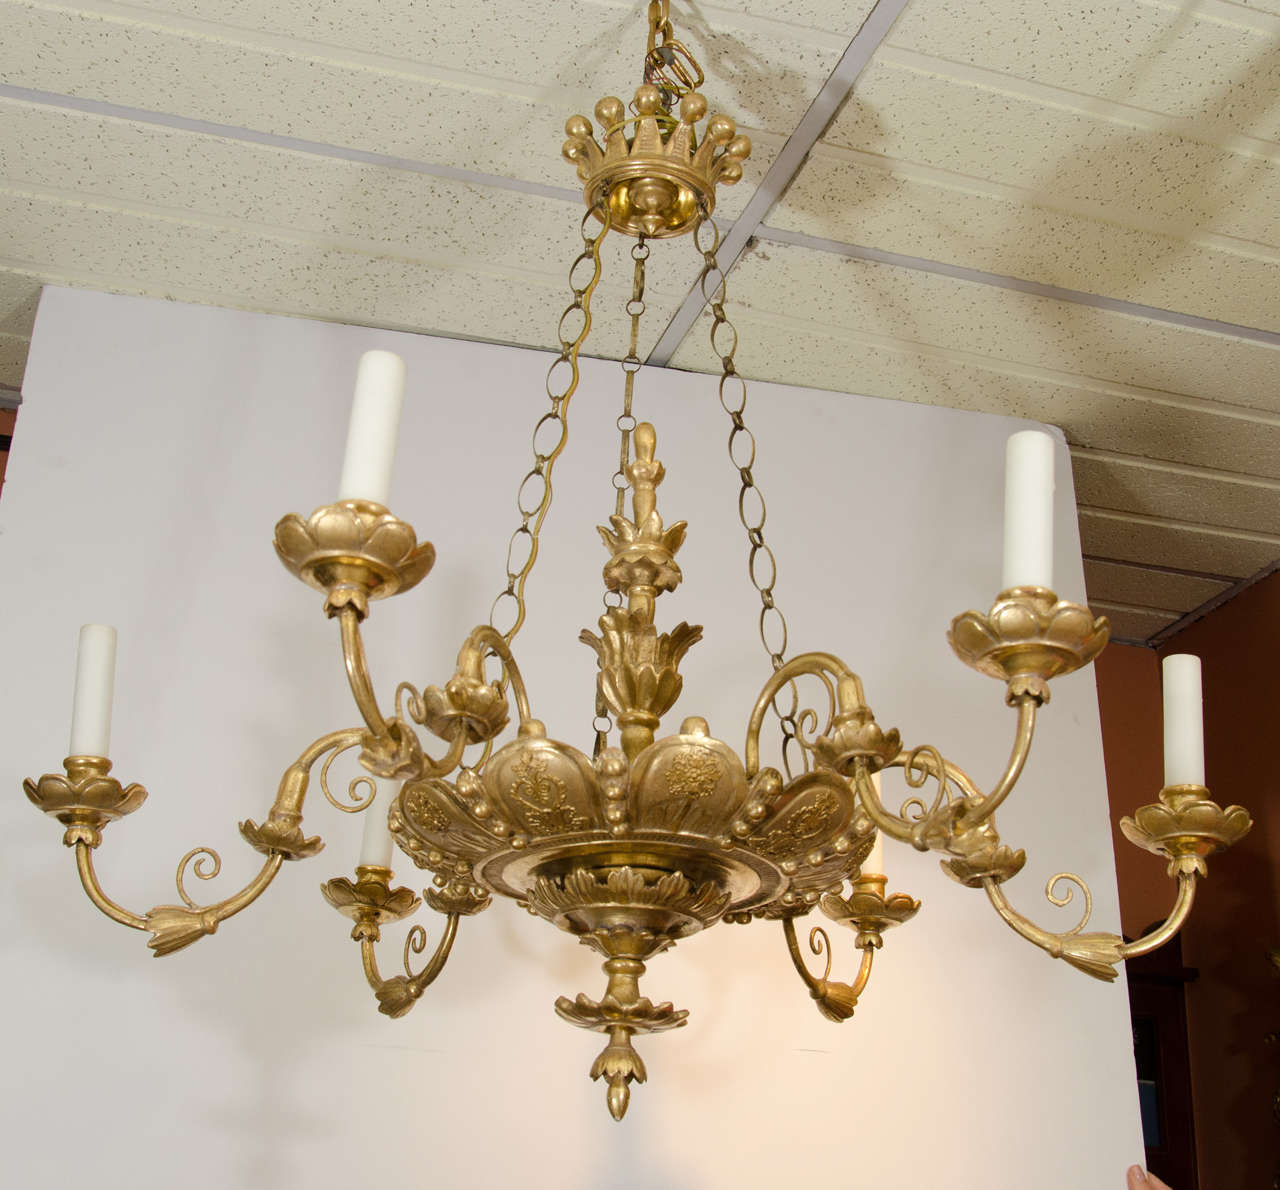 Fine Italian six-light giltwood chandelier with S-scroll arms and delicate raised foliate motifs to the scallop carved dish, chased chains suspended from gilt crown form corona.